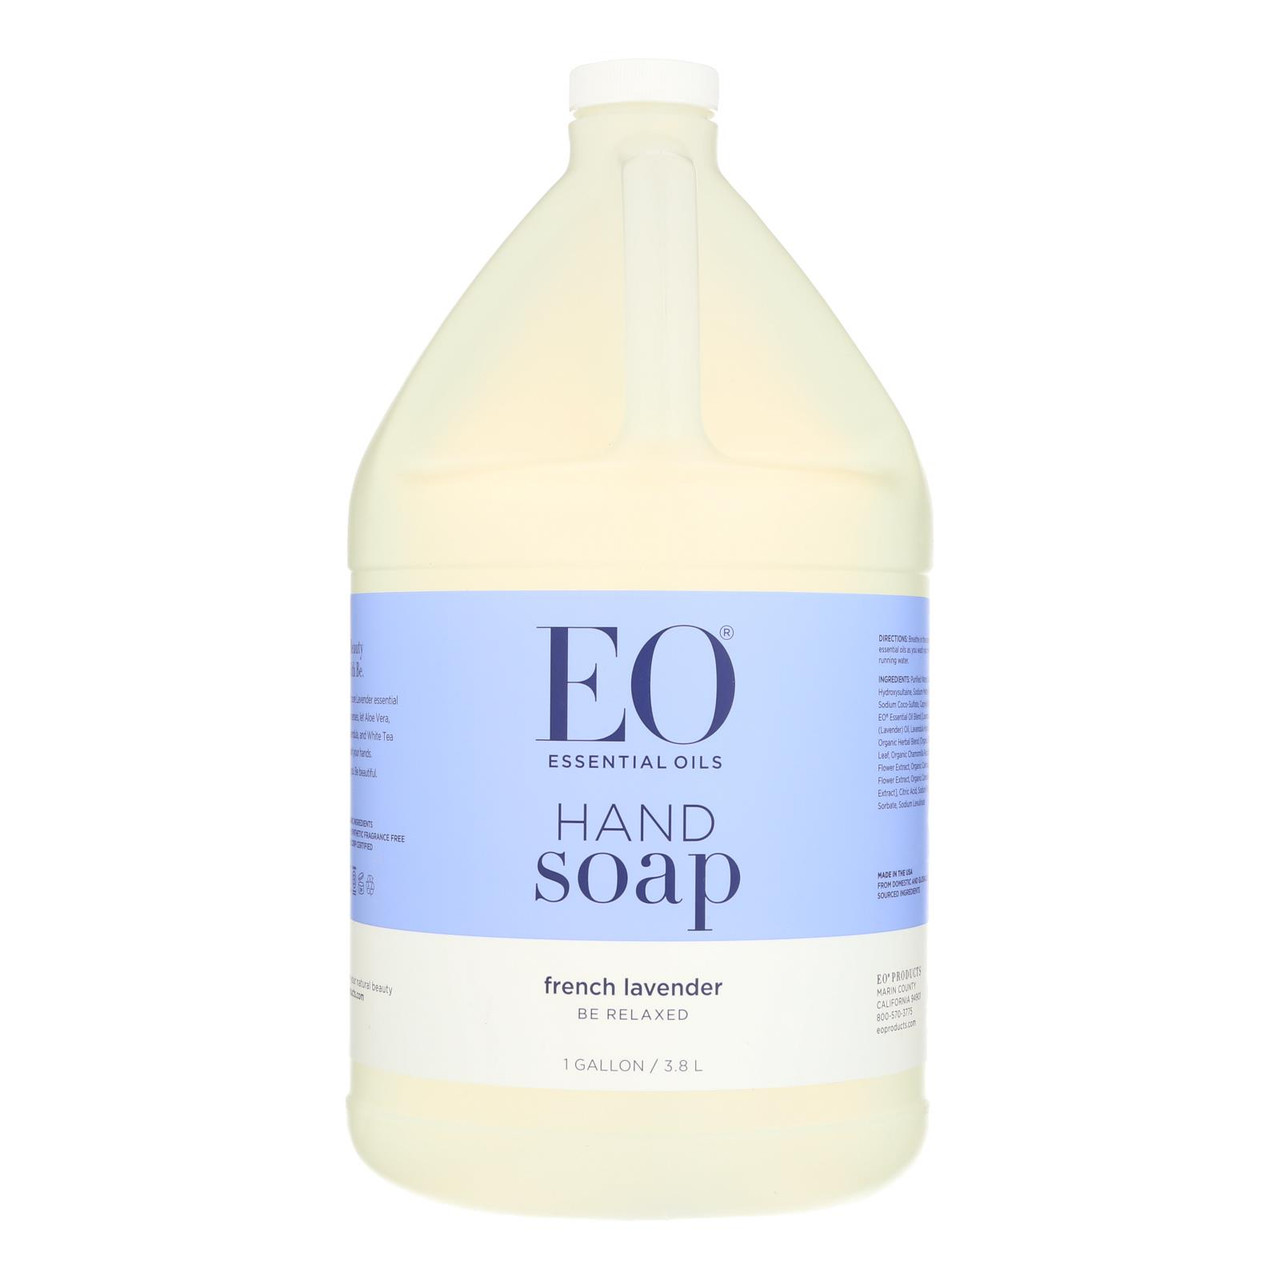 EO Products Liquid Hand Soap, French Lavender - 1 gallon jug